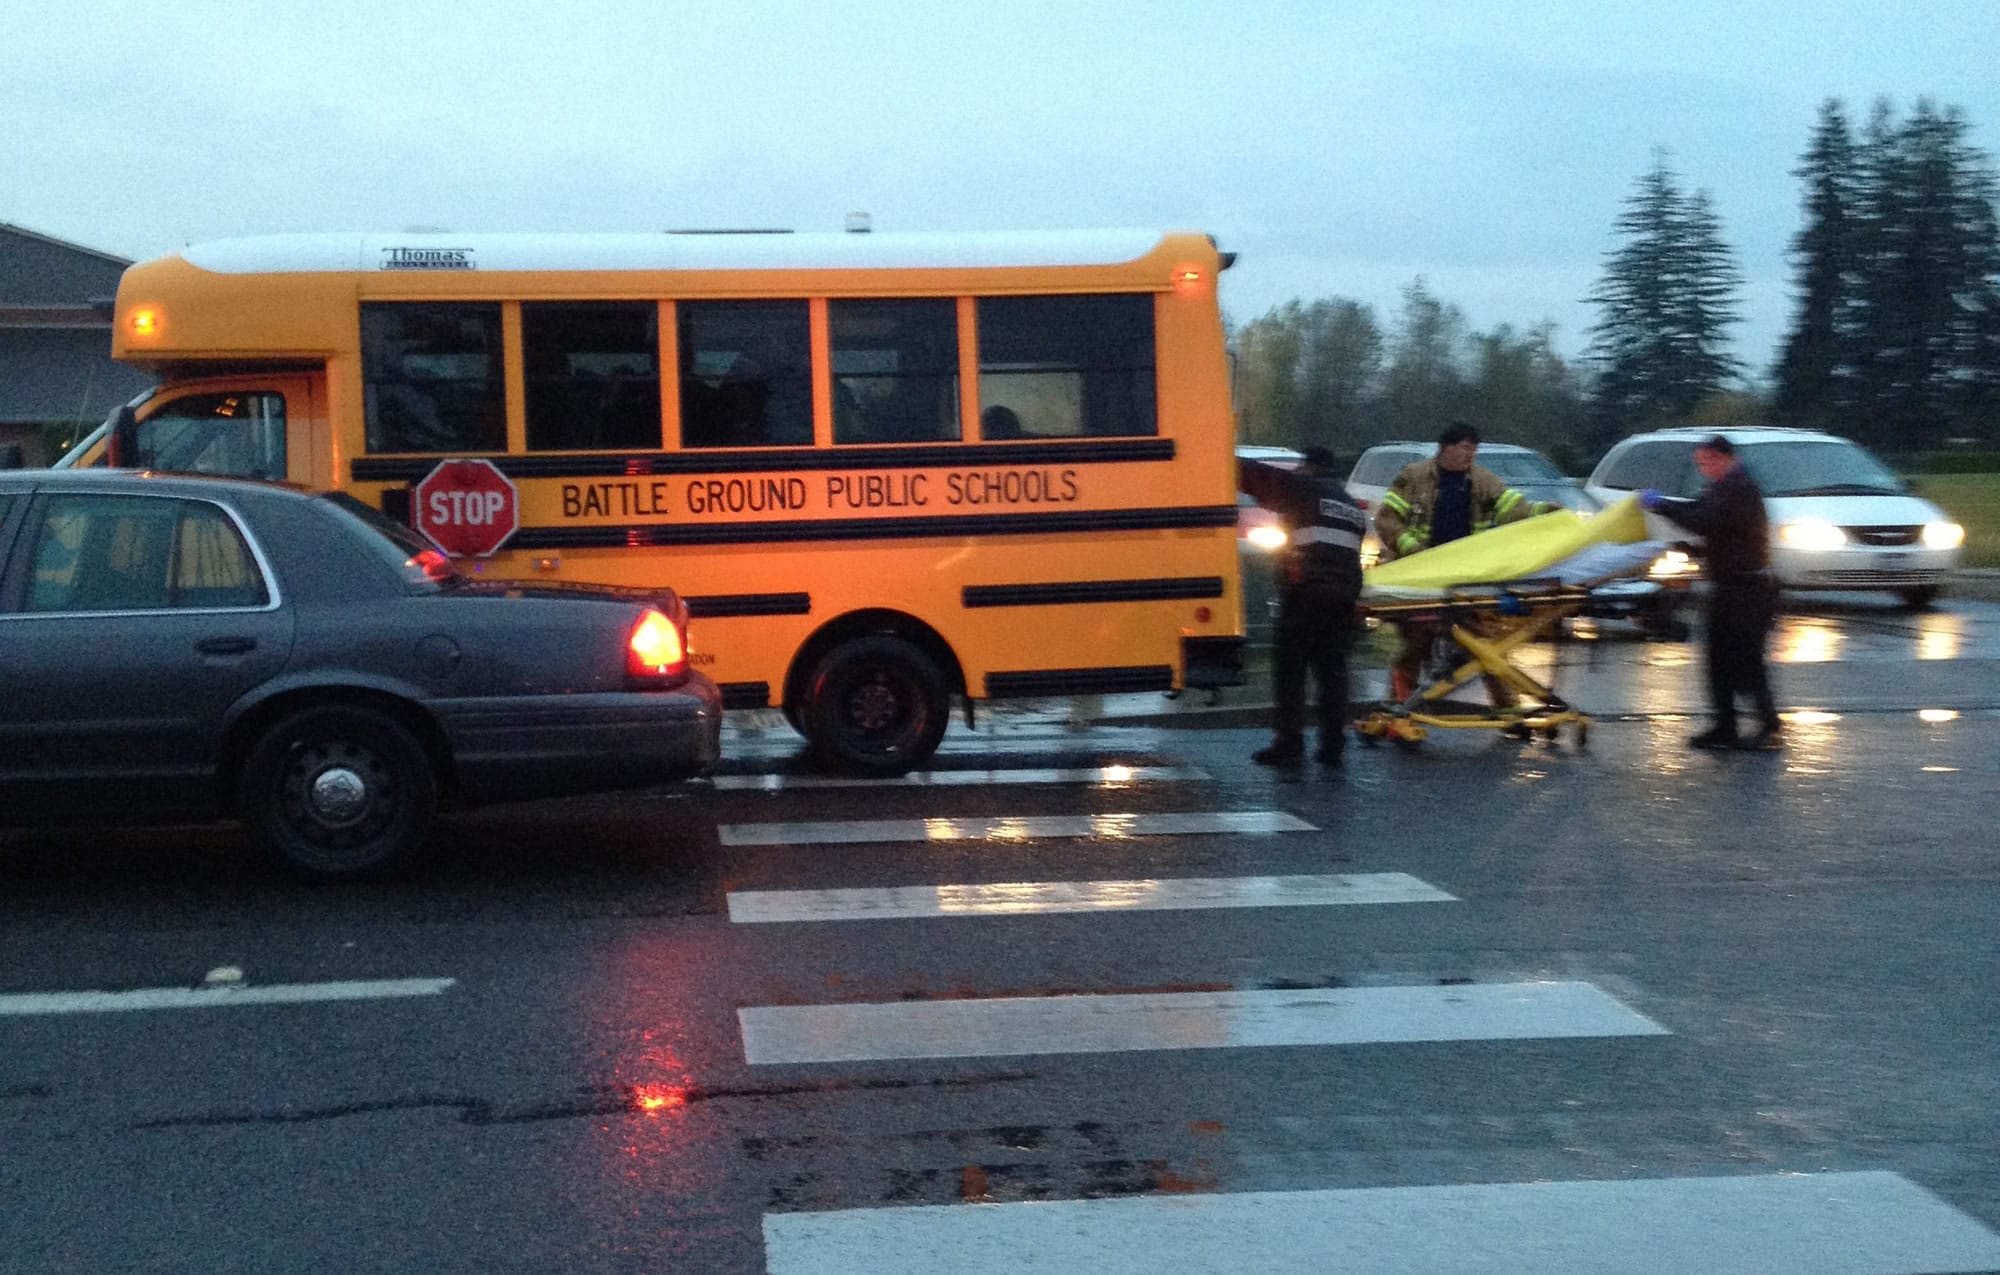 A 15-year-old girl was sent to the hospital after being hit by a school bus in Battle Ground Tuesday morning, officials said.